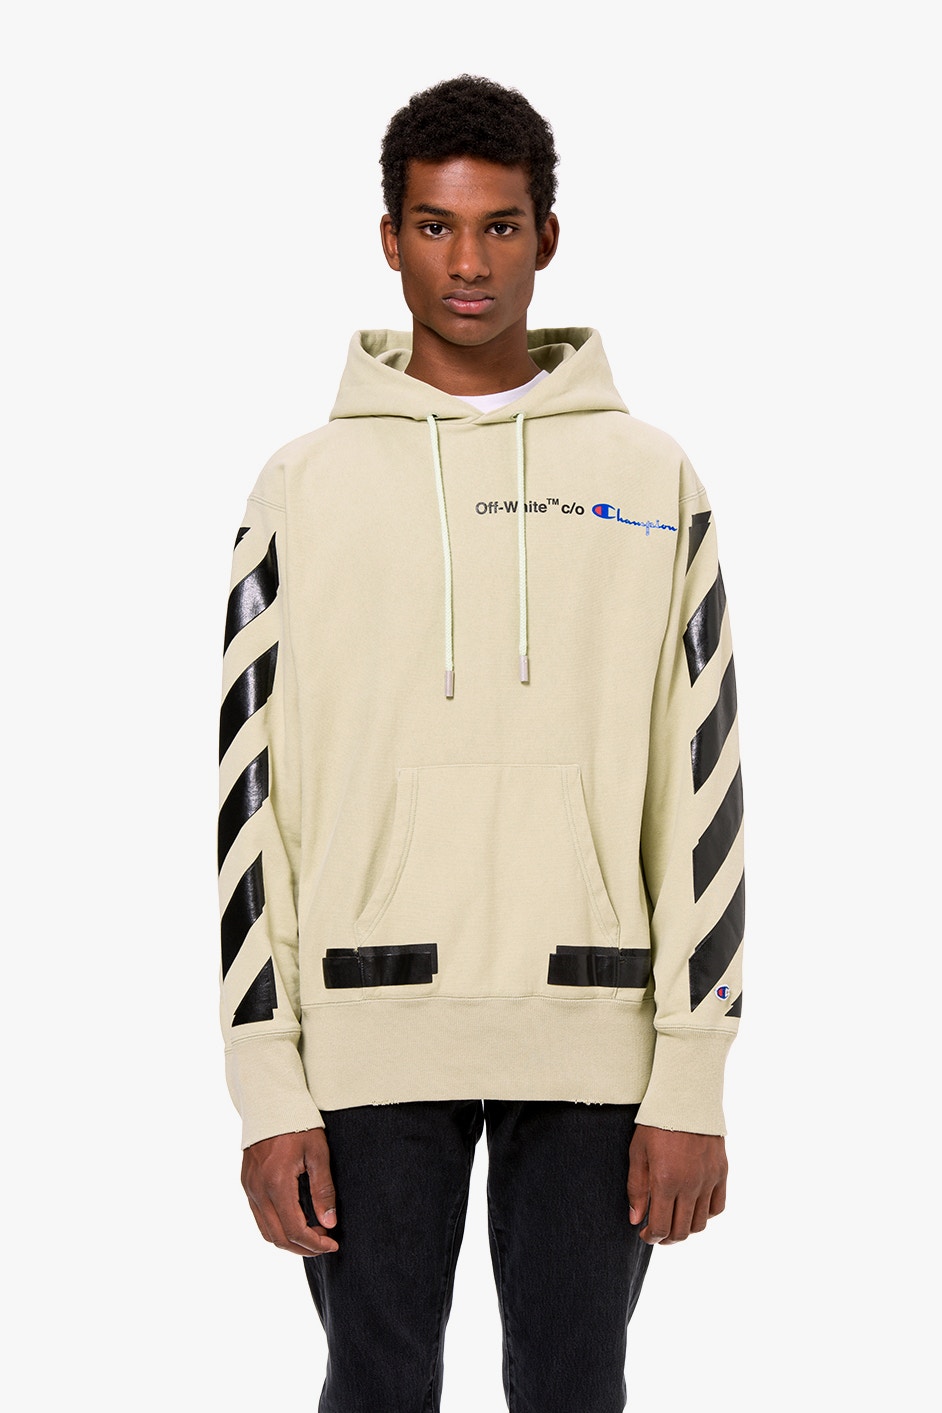 Off -White X Champion Has Dropped Online – PAUSE Online | Men's Fashion ...